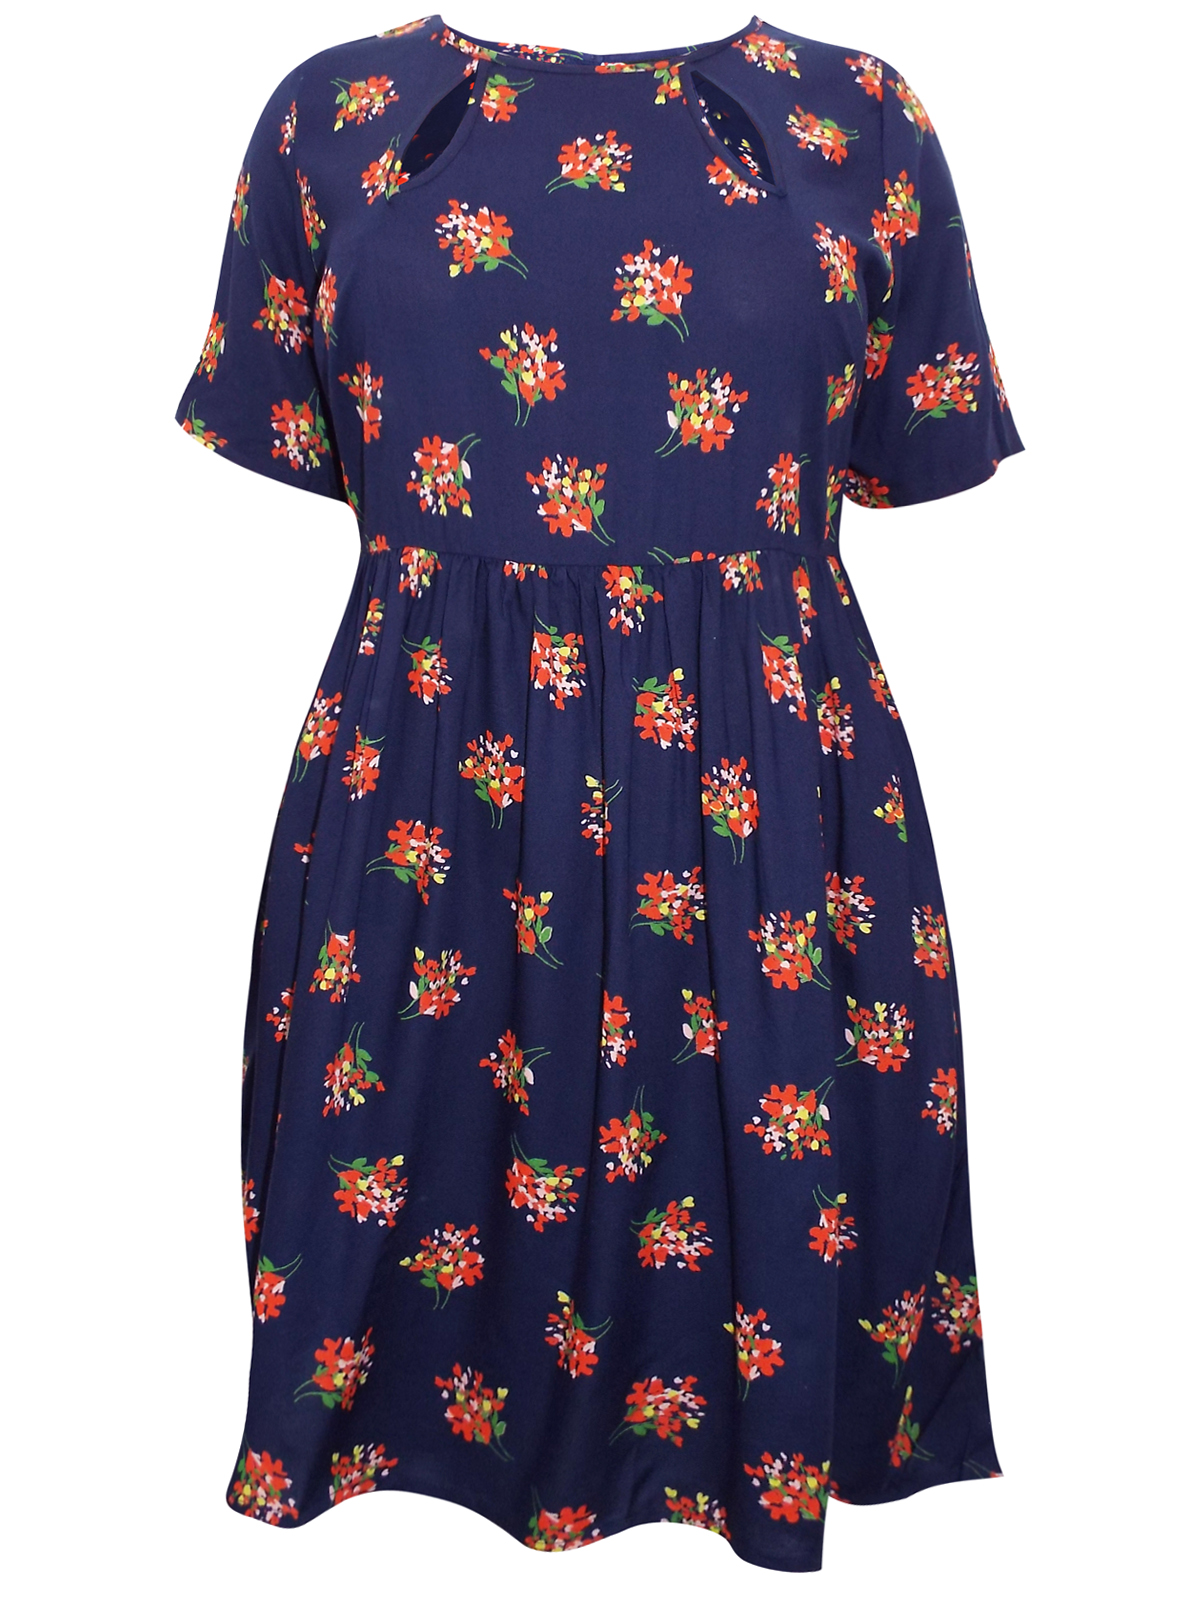 Plus Size wholesale clothing by simply be - - SimplyBe NAVY Floral Cut ...